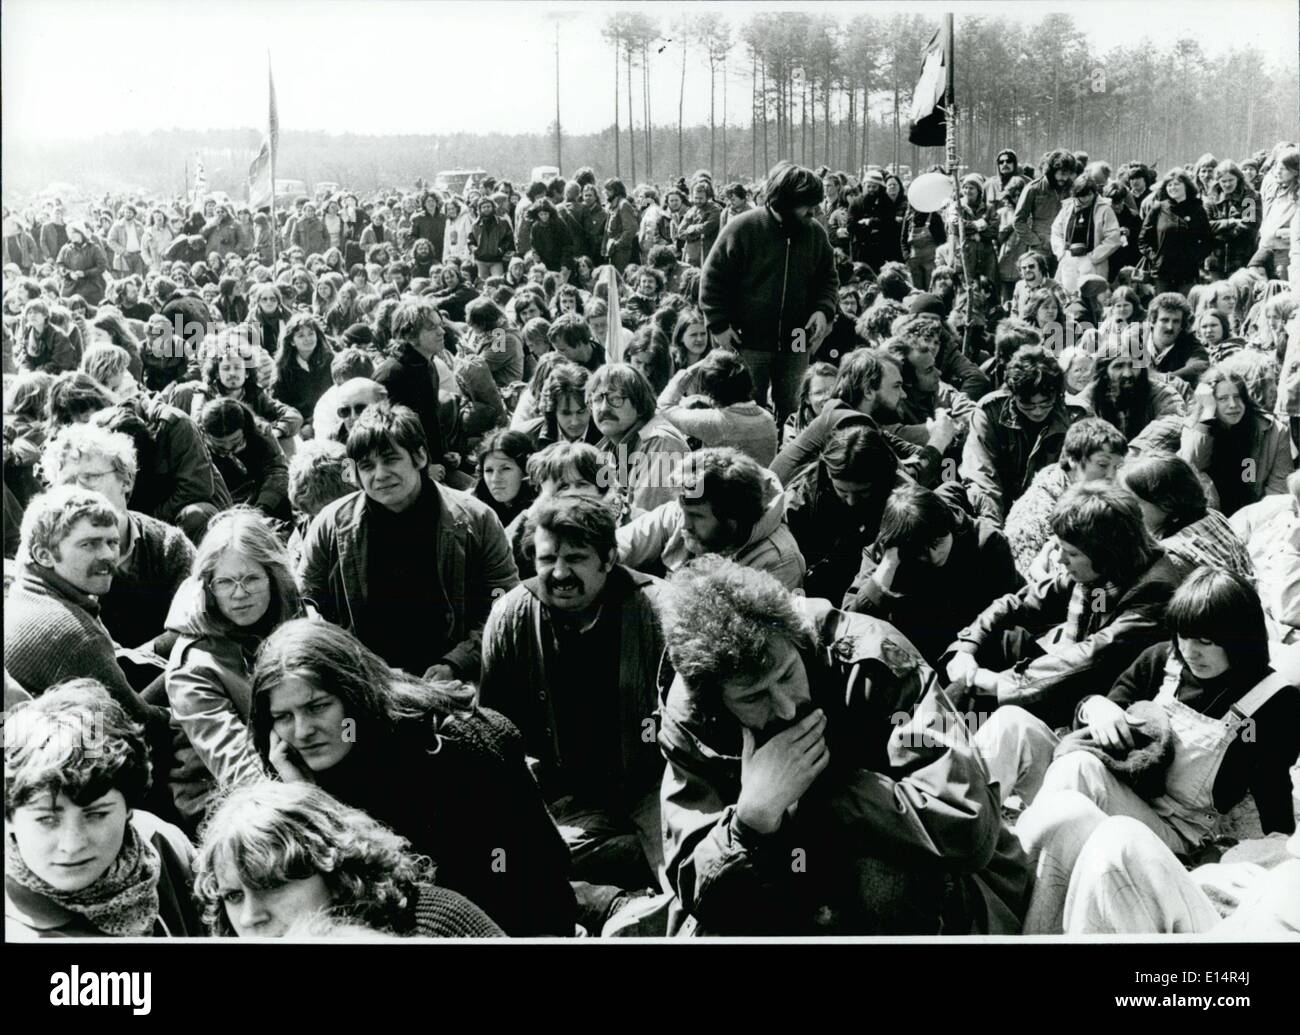 Apr. 18, 2012 - Atomic-power-opponents occupy the area of the atomic-power-plant in Gorleben/West Germany: About 5000 atomic-powerp-opponents of a ll countries of West-Germany occupied at Saturday, may 3rd, 1980 the third auger hole for the planned atomic refuse pit in the salt stone of Gorleben/West Germany. Without intervention of the police and without incidences on the side of the demonstrators. They started to built a kraal on the area of the German Society for Re-Upgrading of Atomic Fuel (DWK. The material for the kraal was given by the population of the area around Gorleben Stock Photo